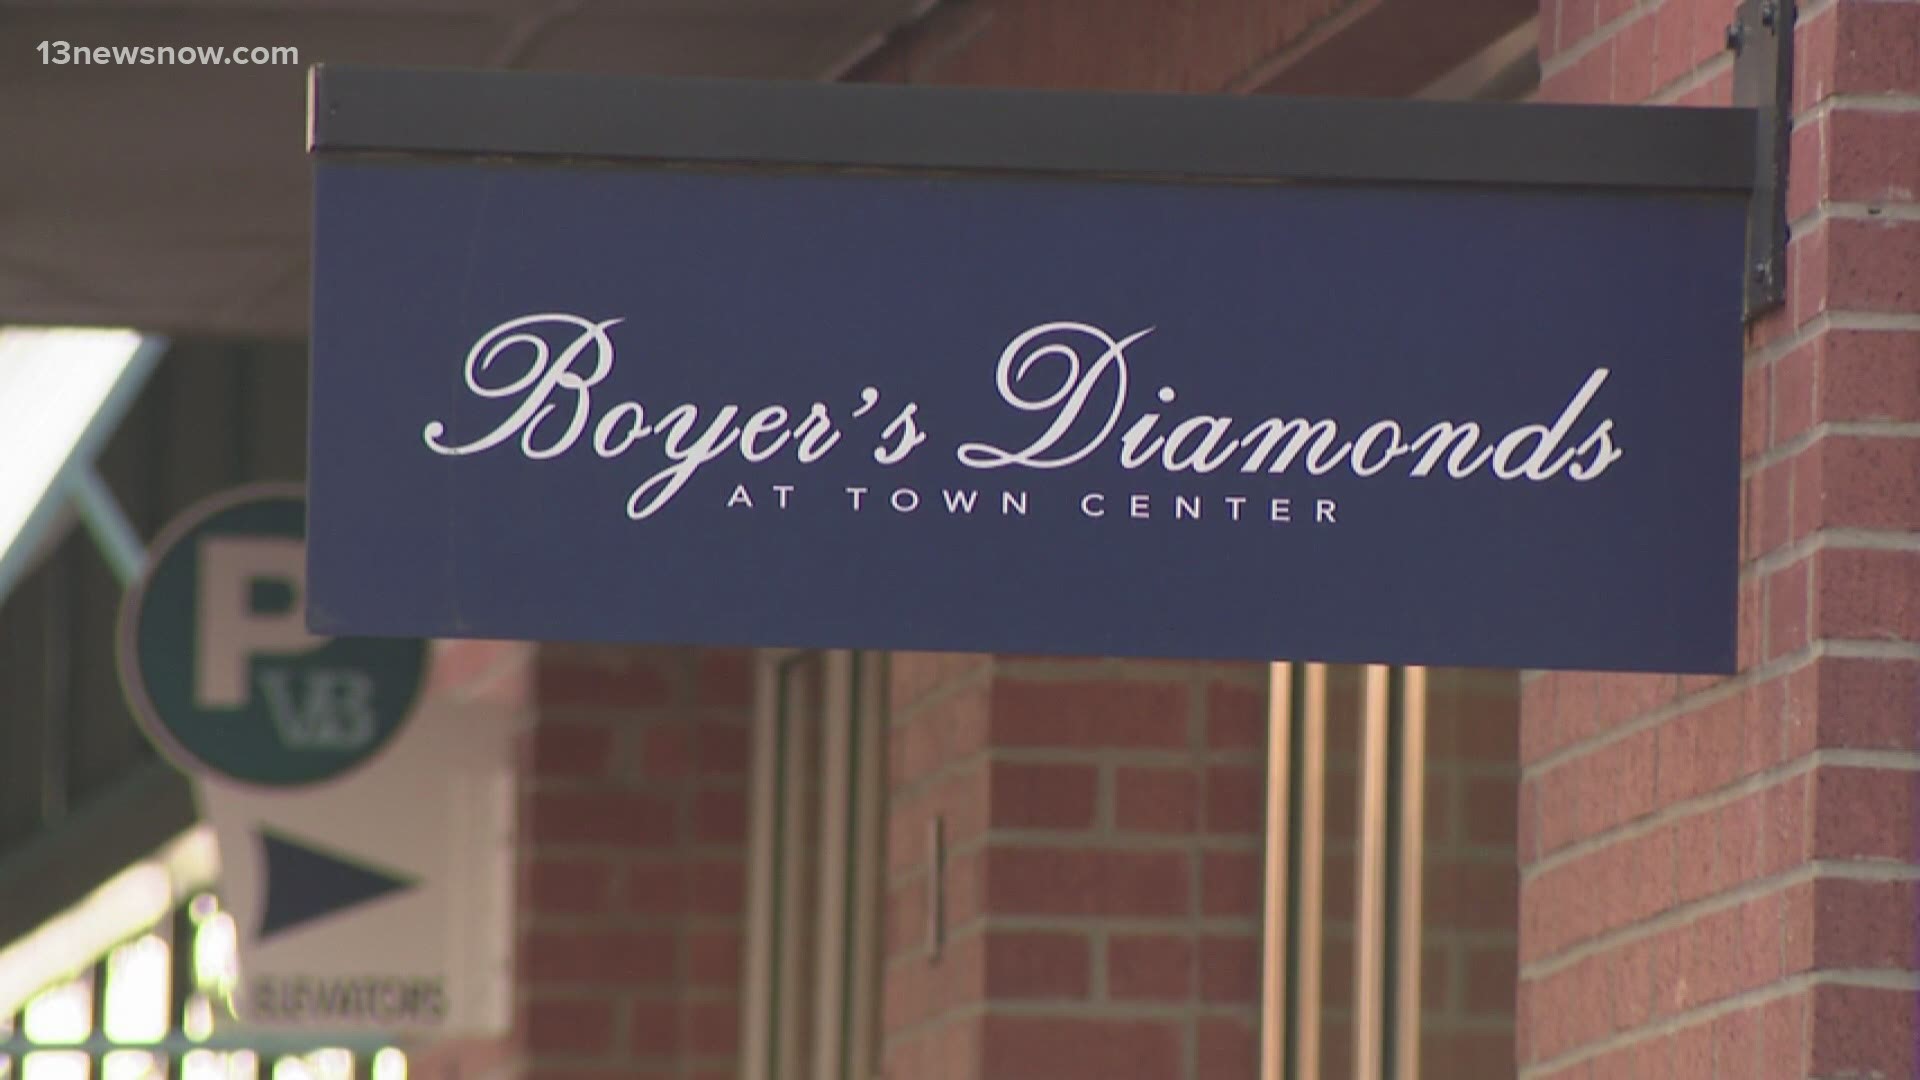 Boyer's Diamonds in Town Center is closing for good, after the owner, David Cohen died unexpectedly from COVID-19. The Williamsburg location will remain open.